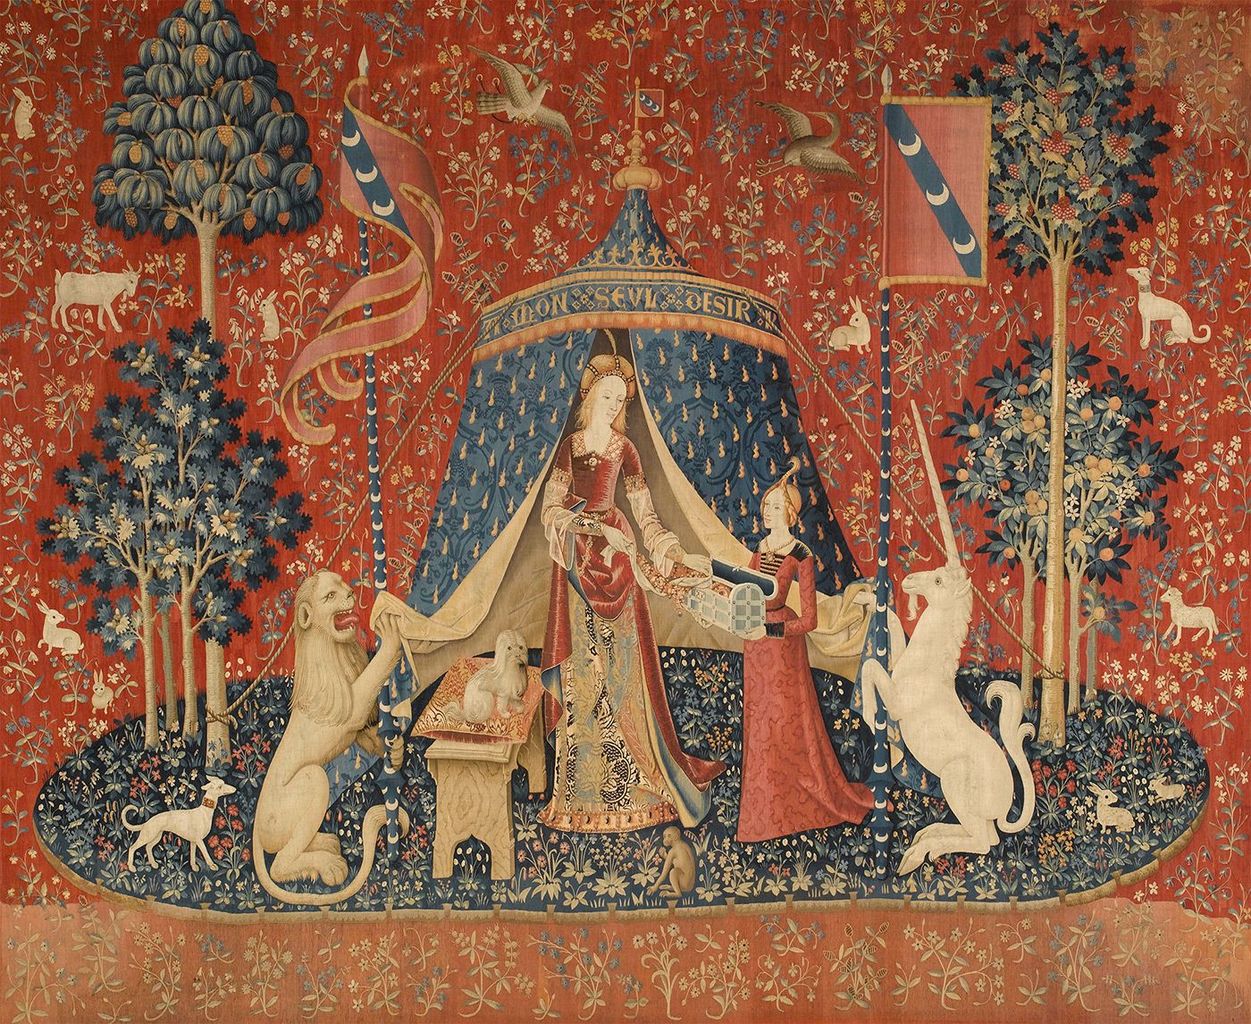 The Lady and the Unicorn - http://www.tchevalier.com/unicorn/tapestries/desir.html#, Public Domain, https://commons.wikimedia.org/w/index.php?curid=2723771